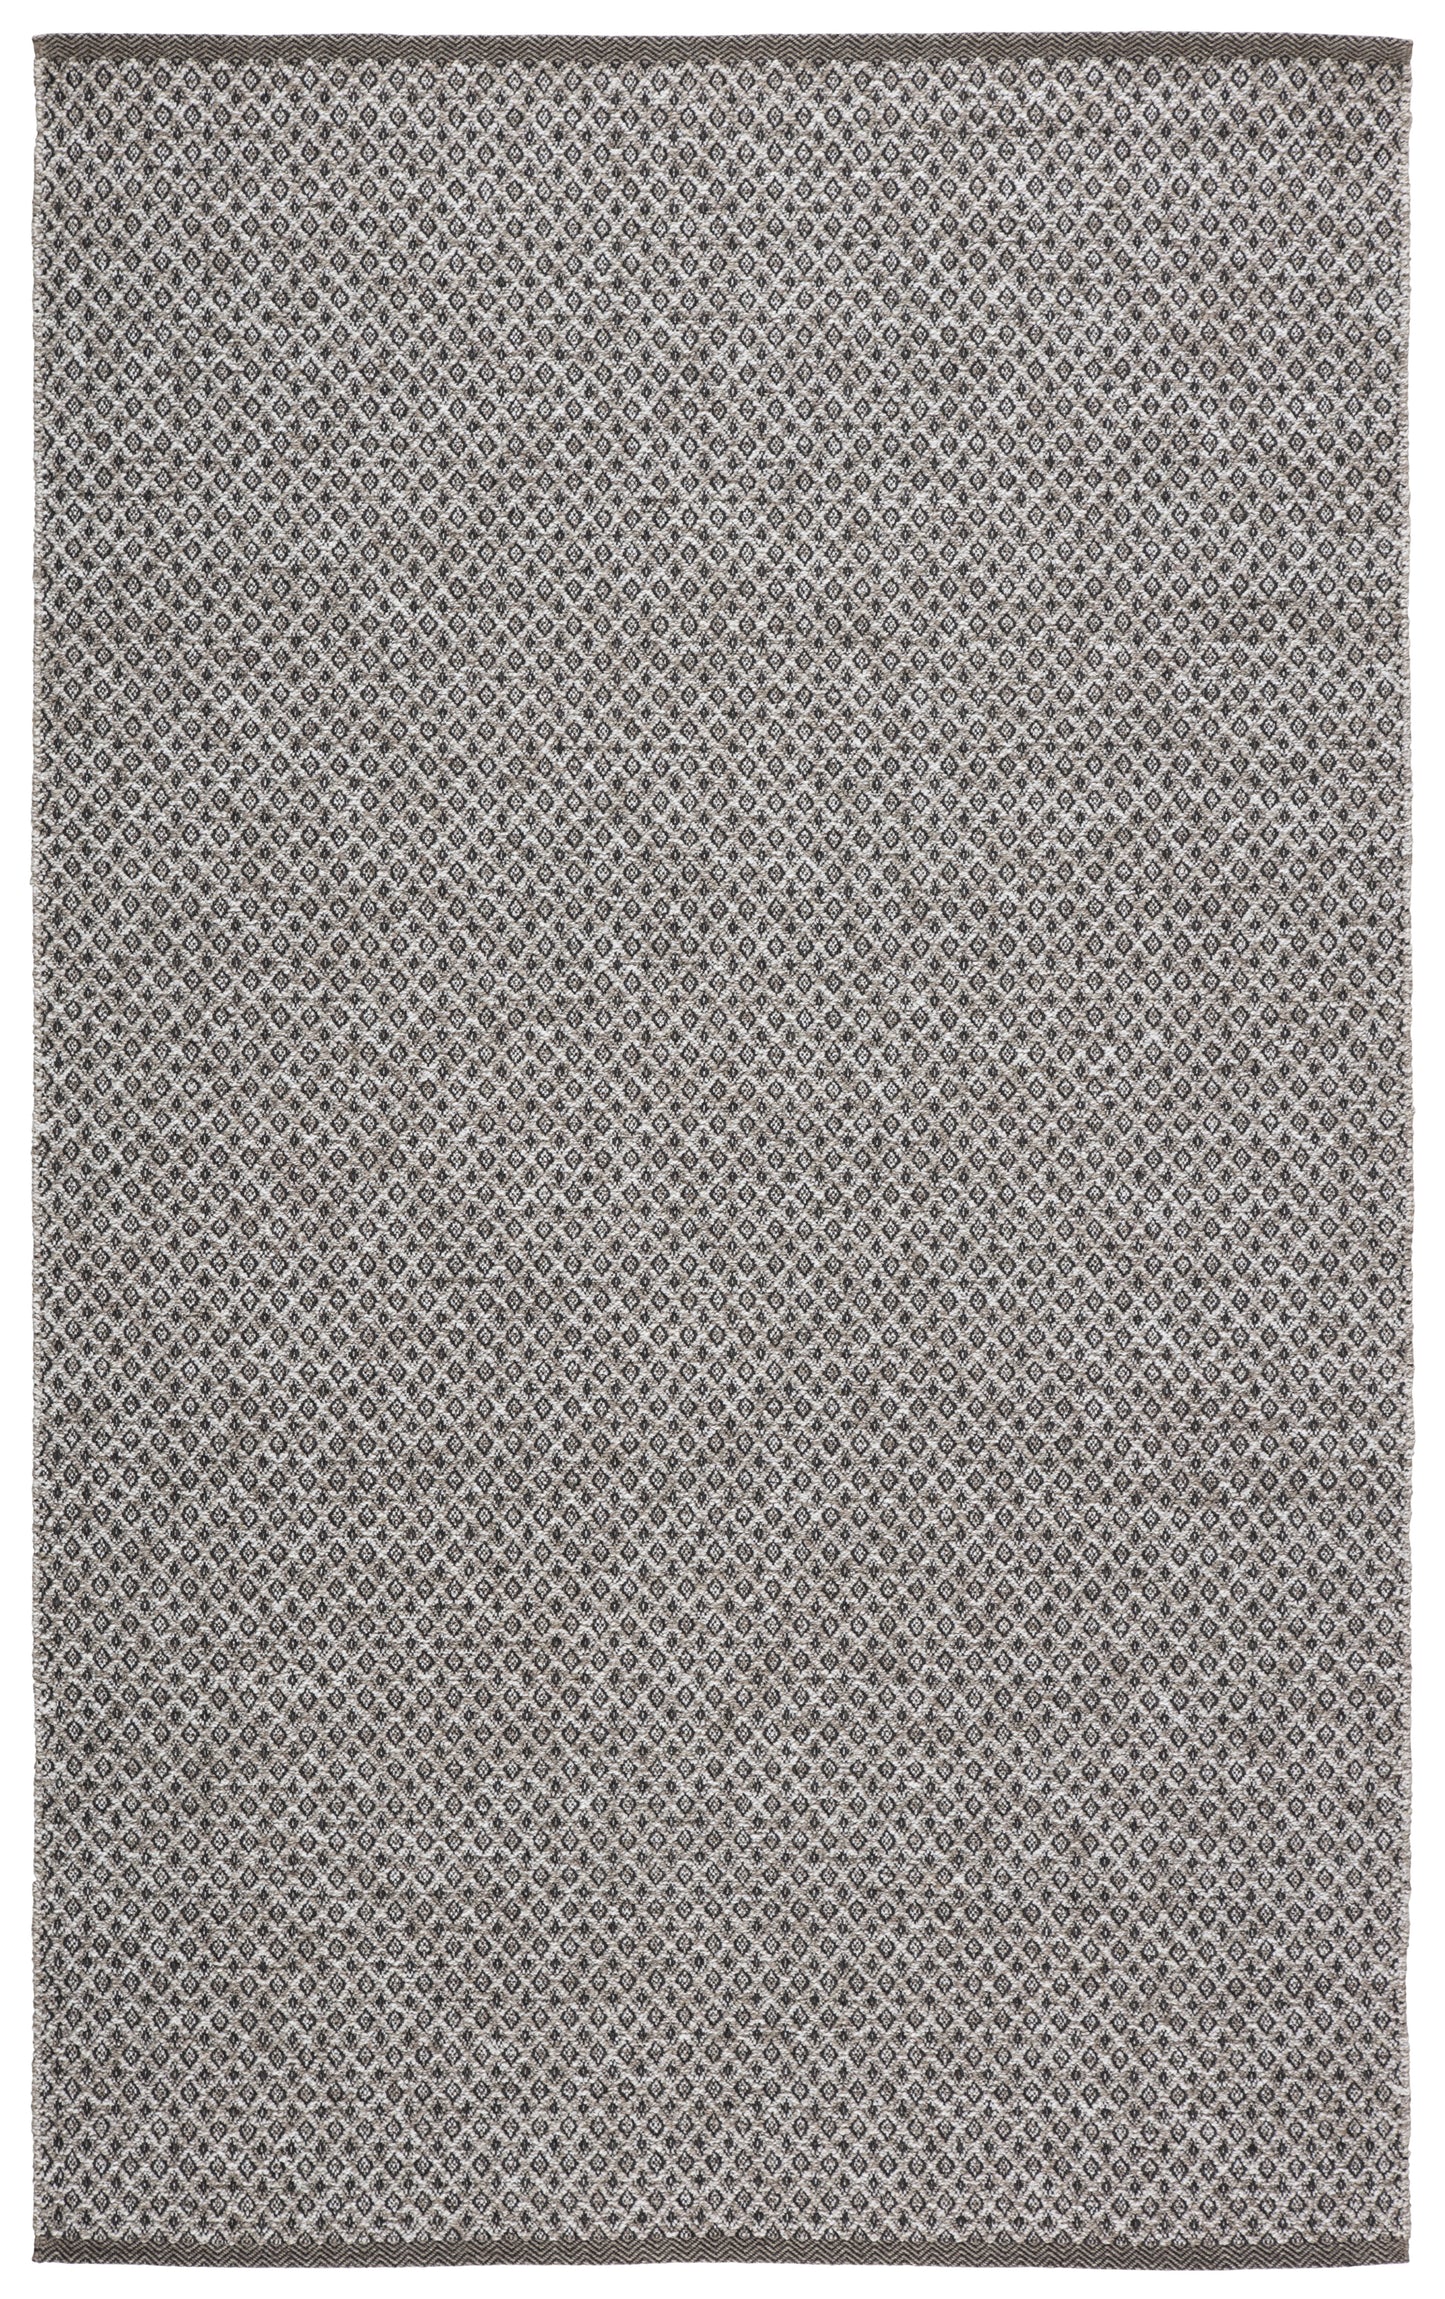 Nirvana Foster Handmade Synthetic Blend Outdoor Area Rug From Jaipur Living